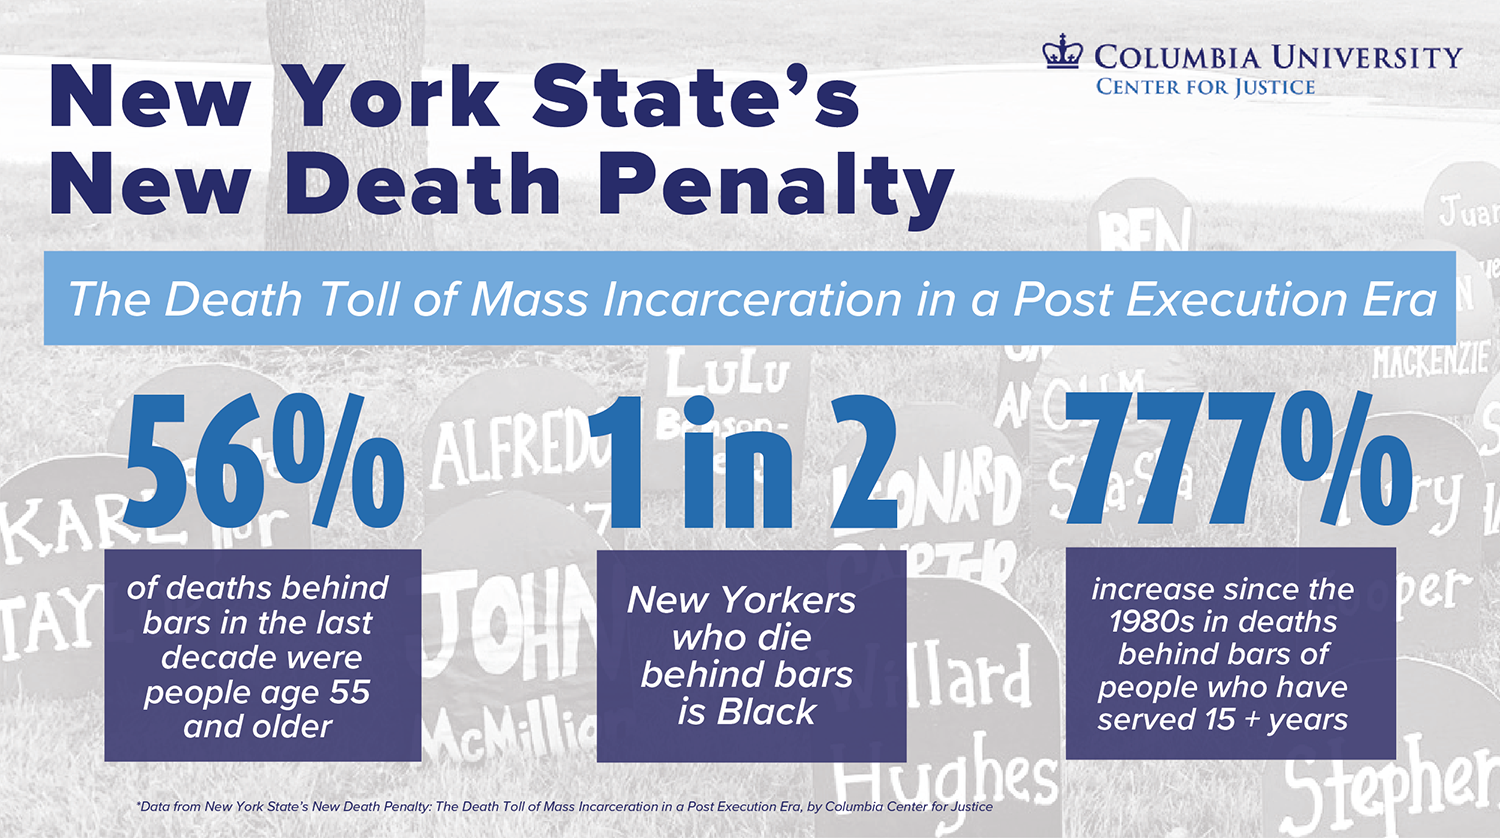 New York's New Death Penalty: 56% of deaths behind bars in the last decade were people 55 and older, 1 in 2 New Yorkers who die behind bars is Black, 777% increase in since the 1980s in deaths behind bars of people who have served 15+ years